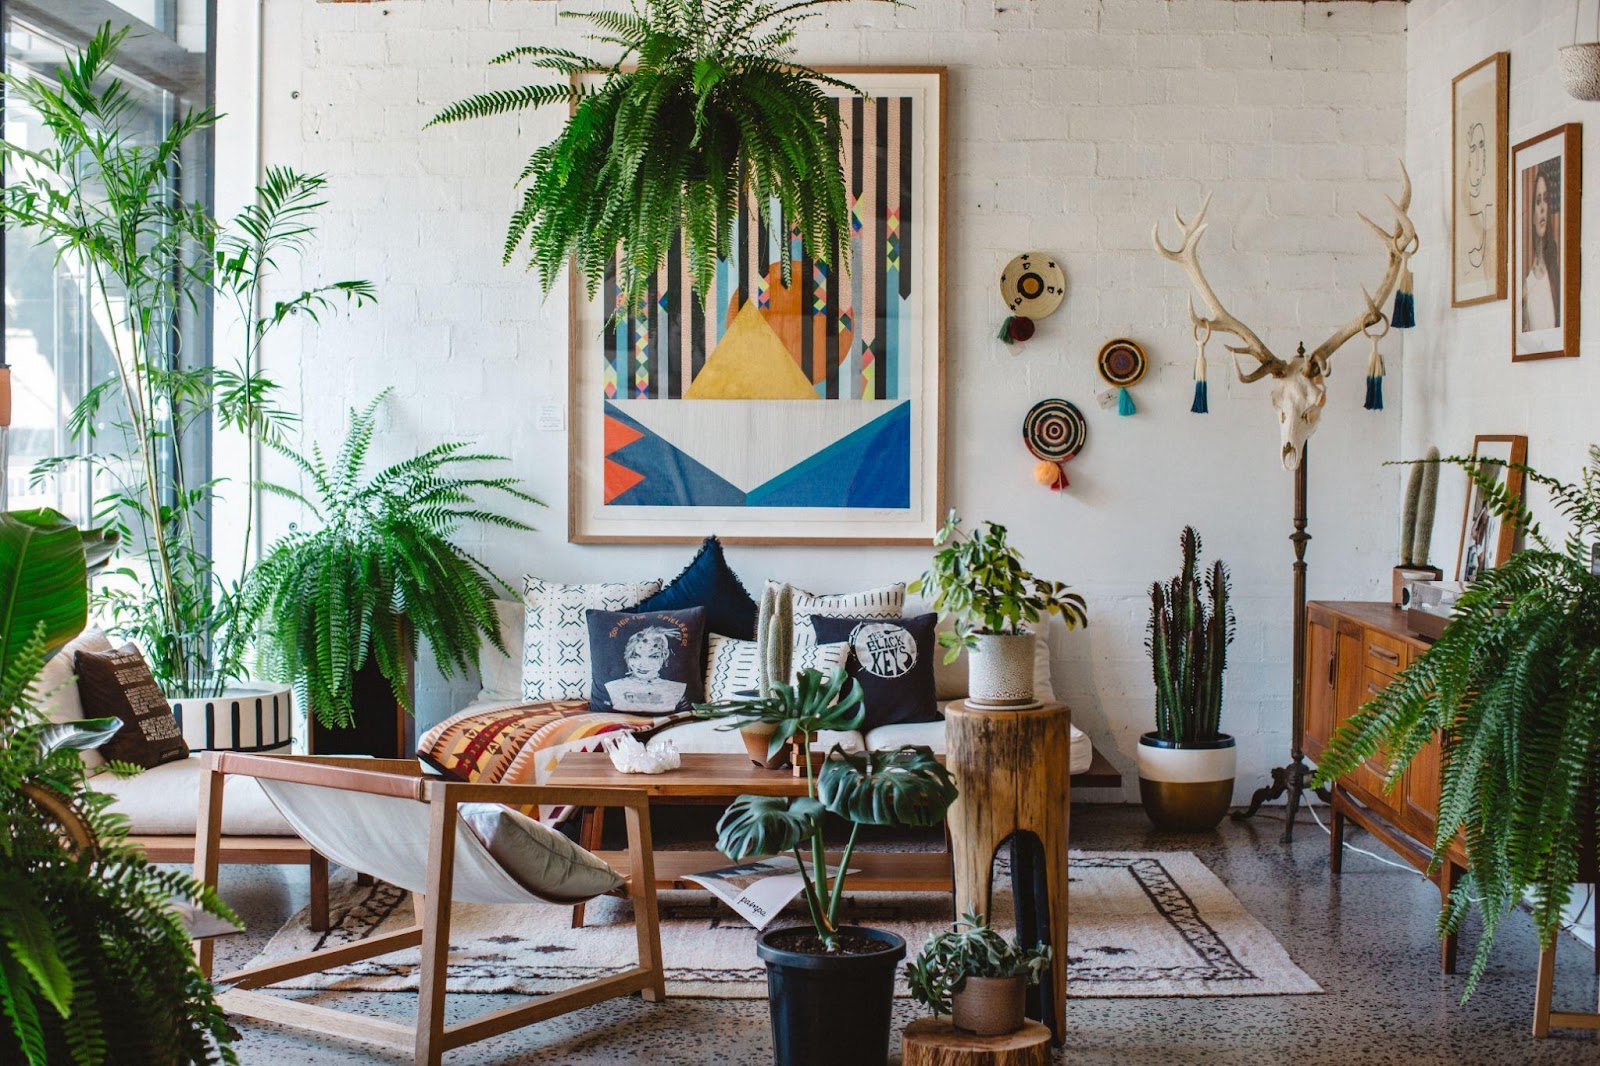 9 Unexpected Ways to Decorate Your Home with Plants